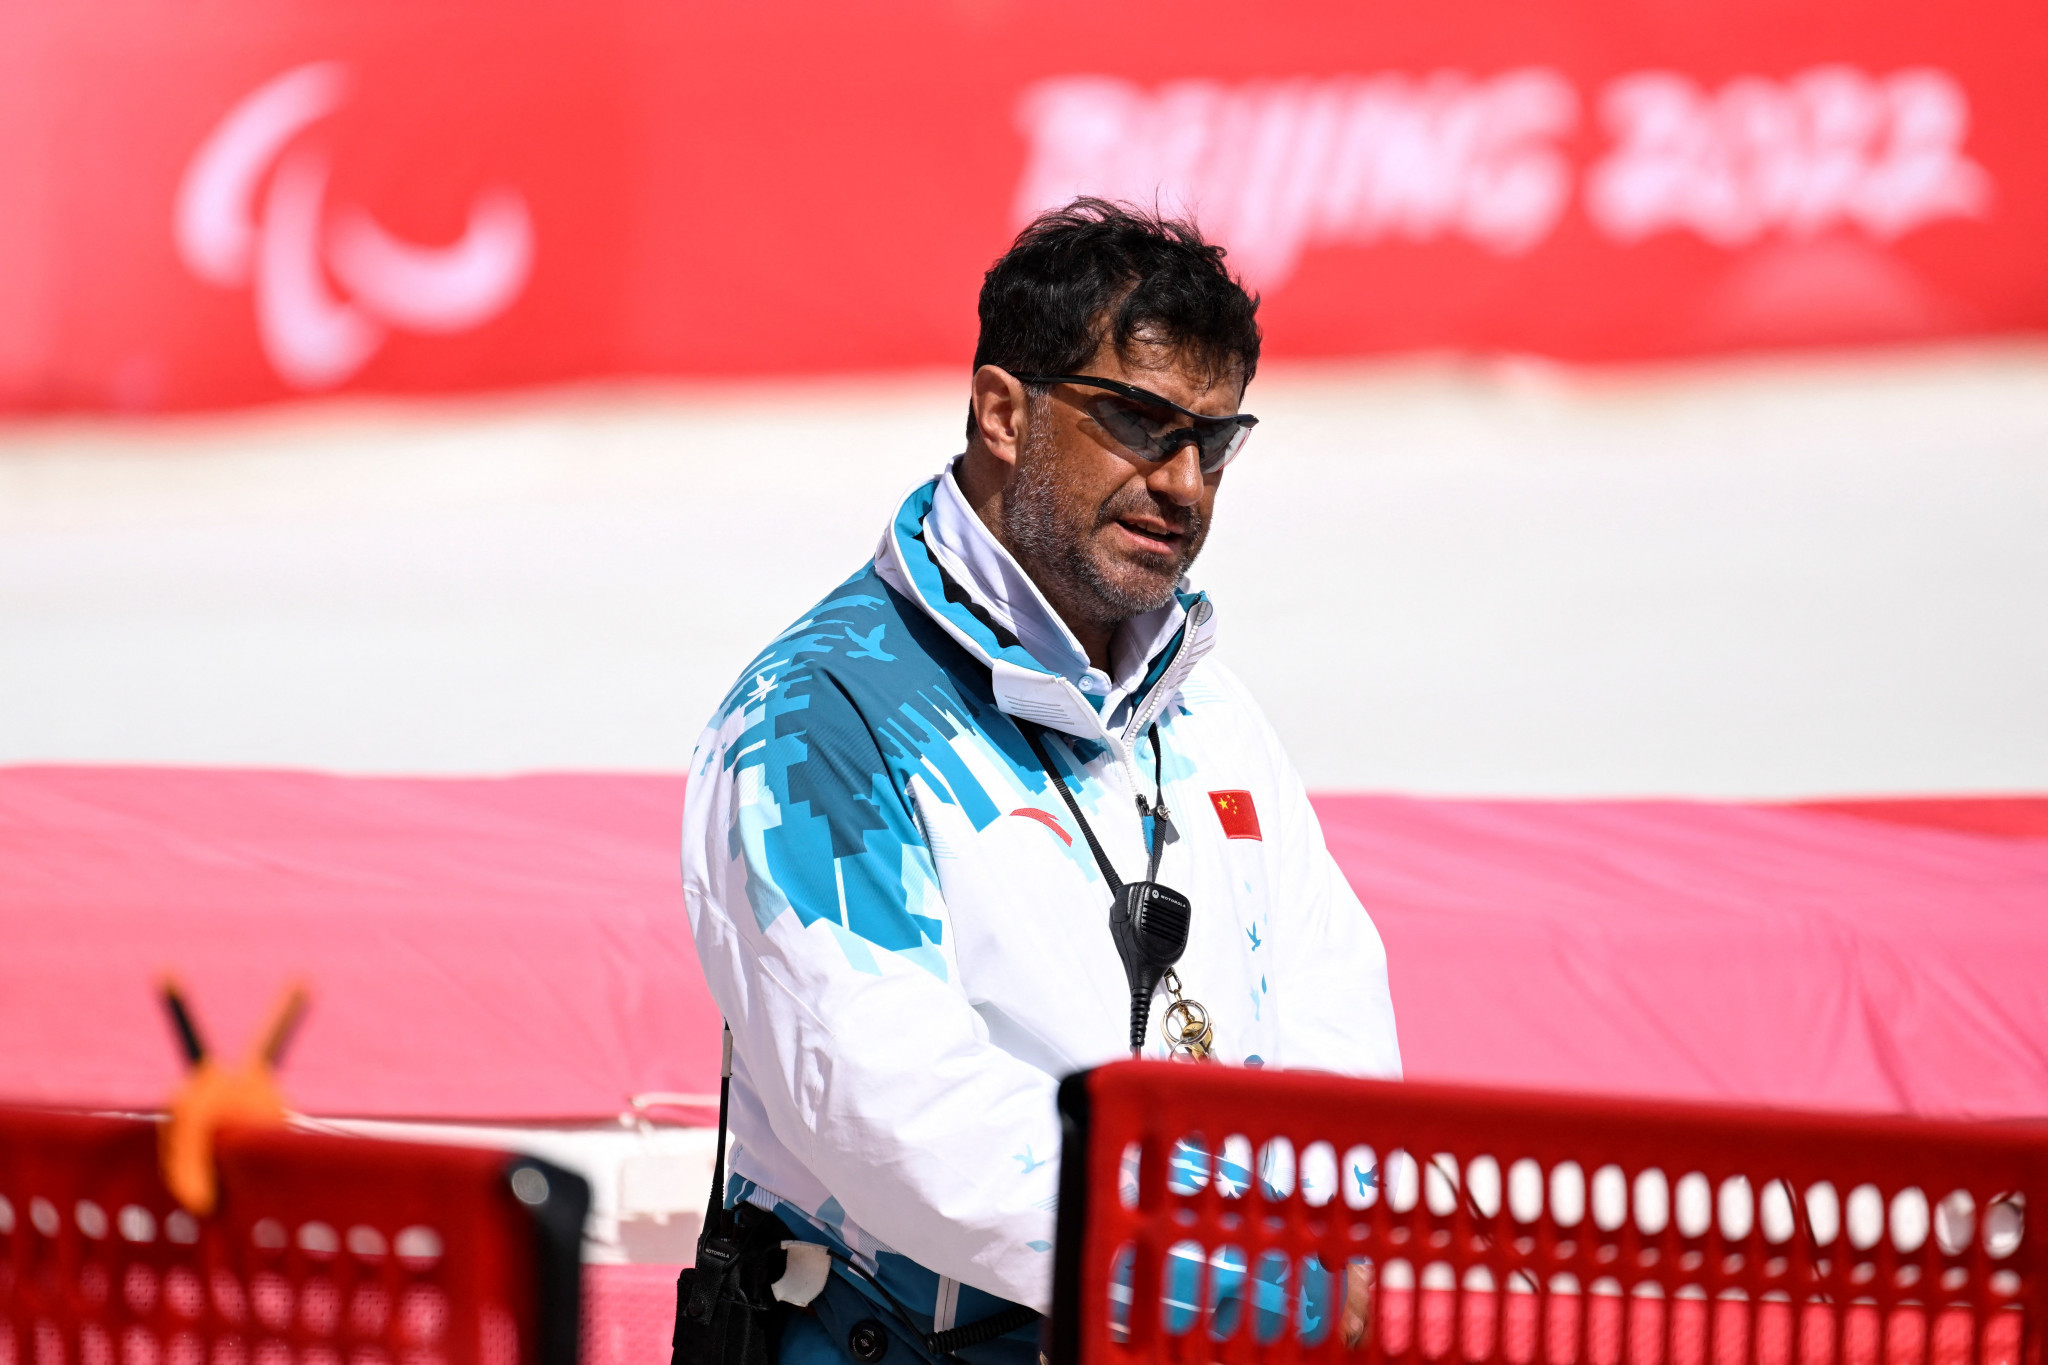 China's Para Alpine skiing head coach Dario Capelli credited investment in a sporting programme for the country's success at Beijing 2022 ©Getty Images